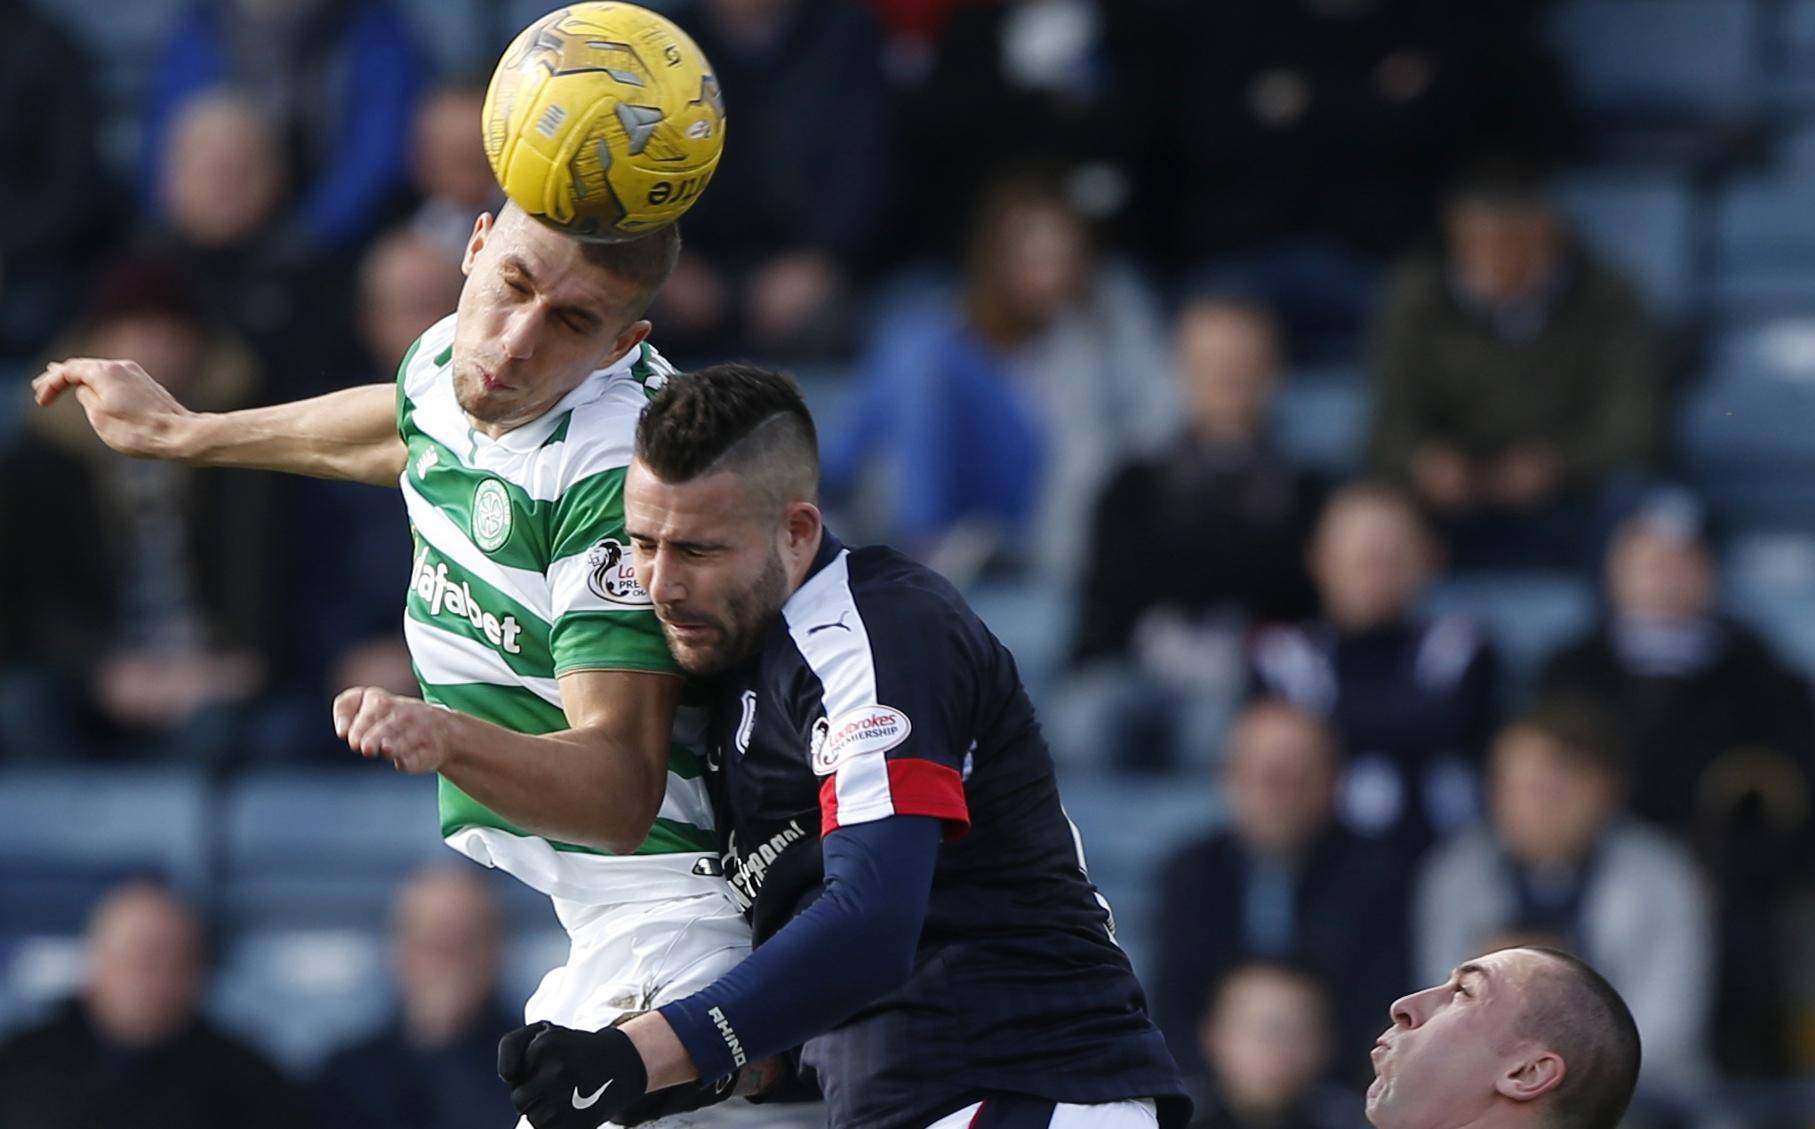 Celtic's Jozo Simunovic in action with Dundee's Marcus Haber